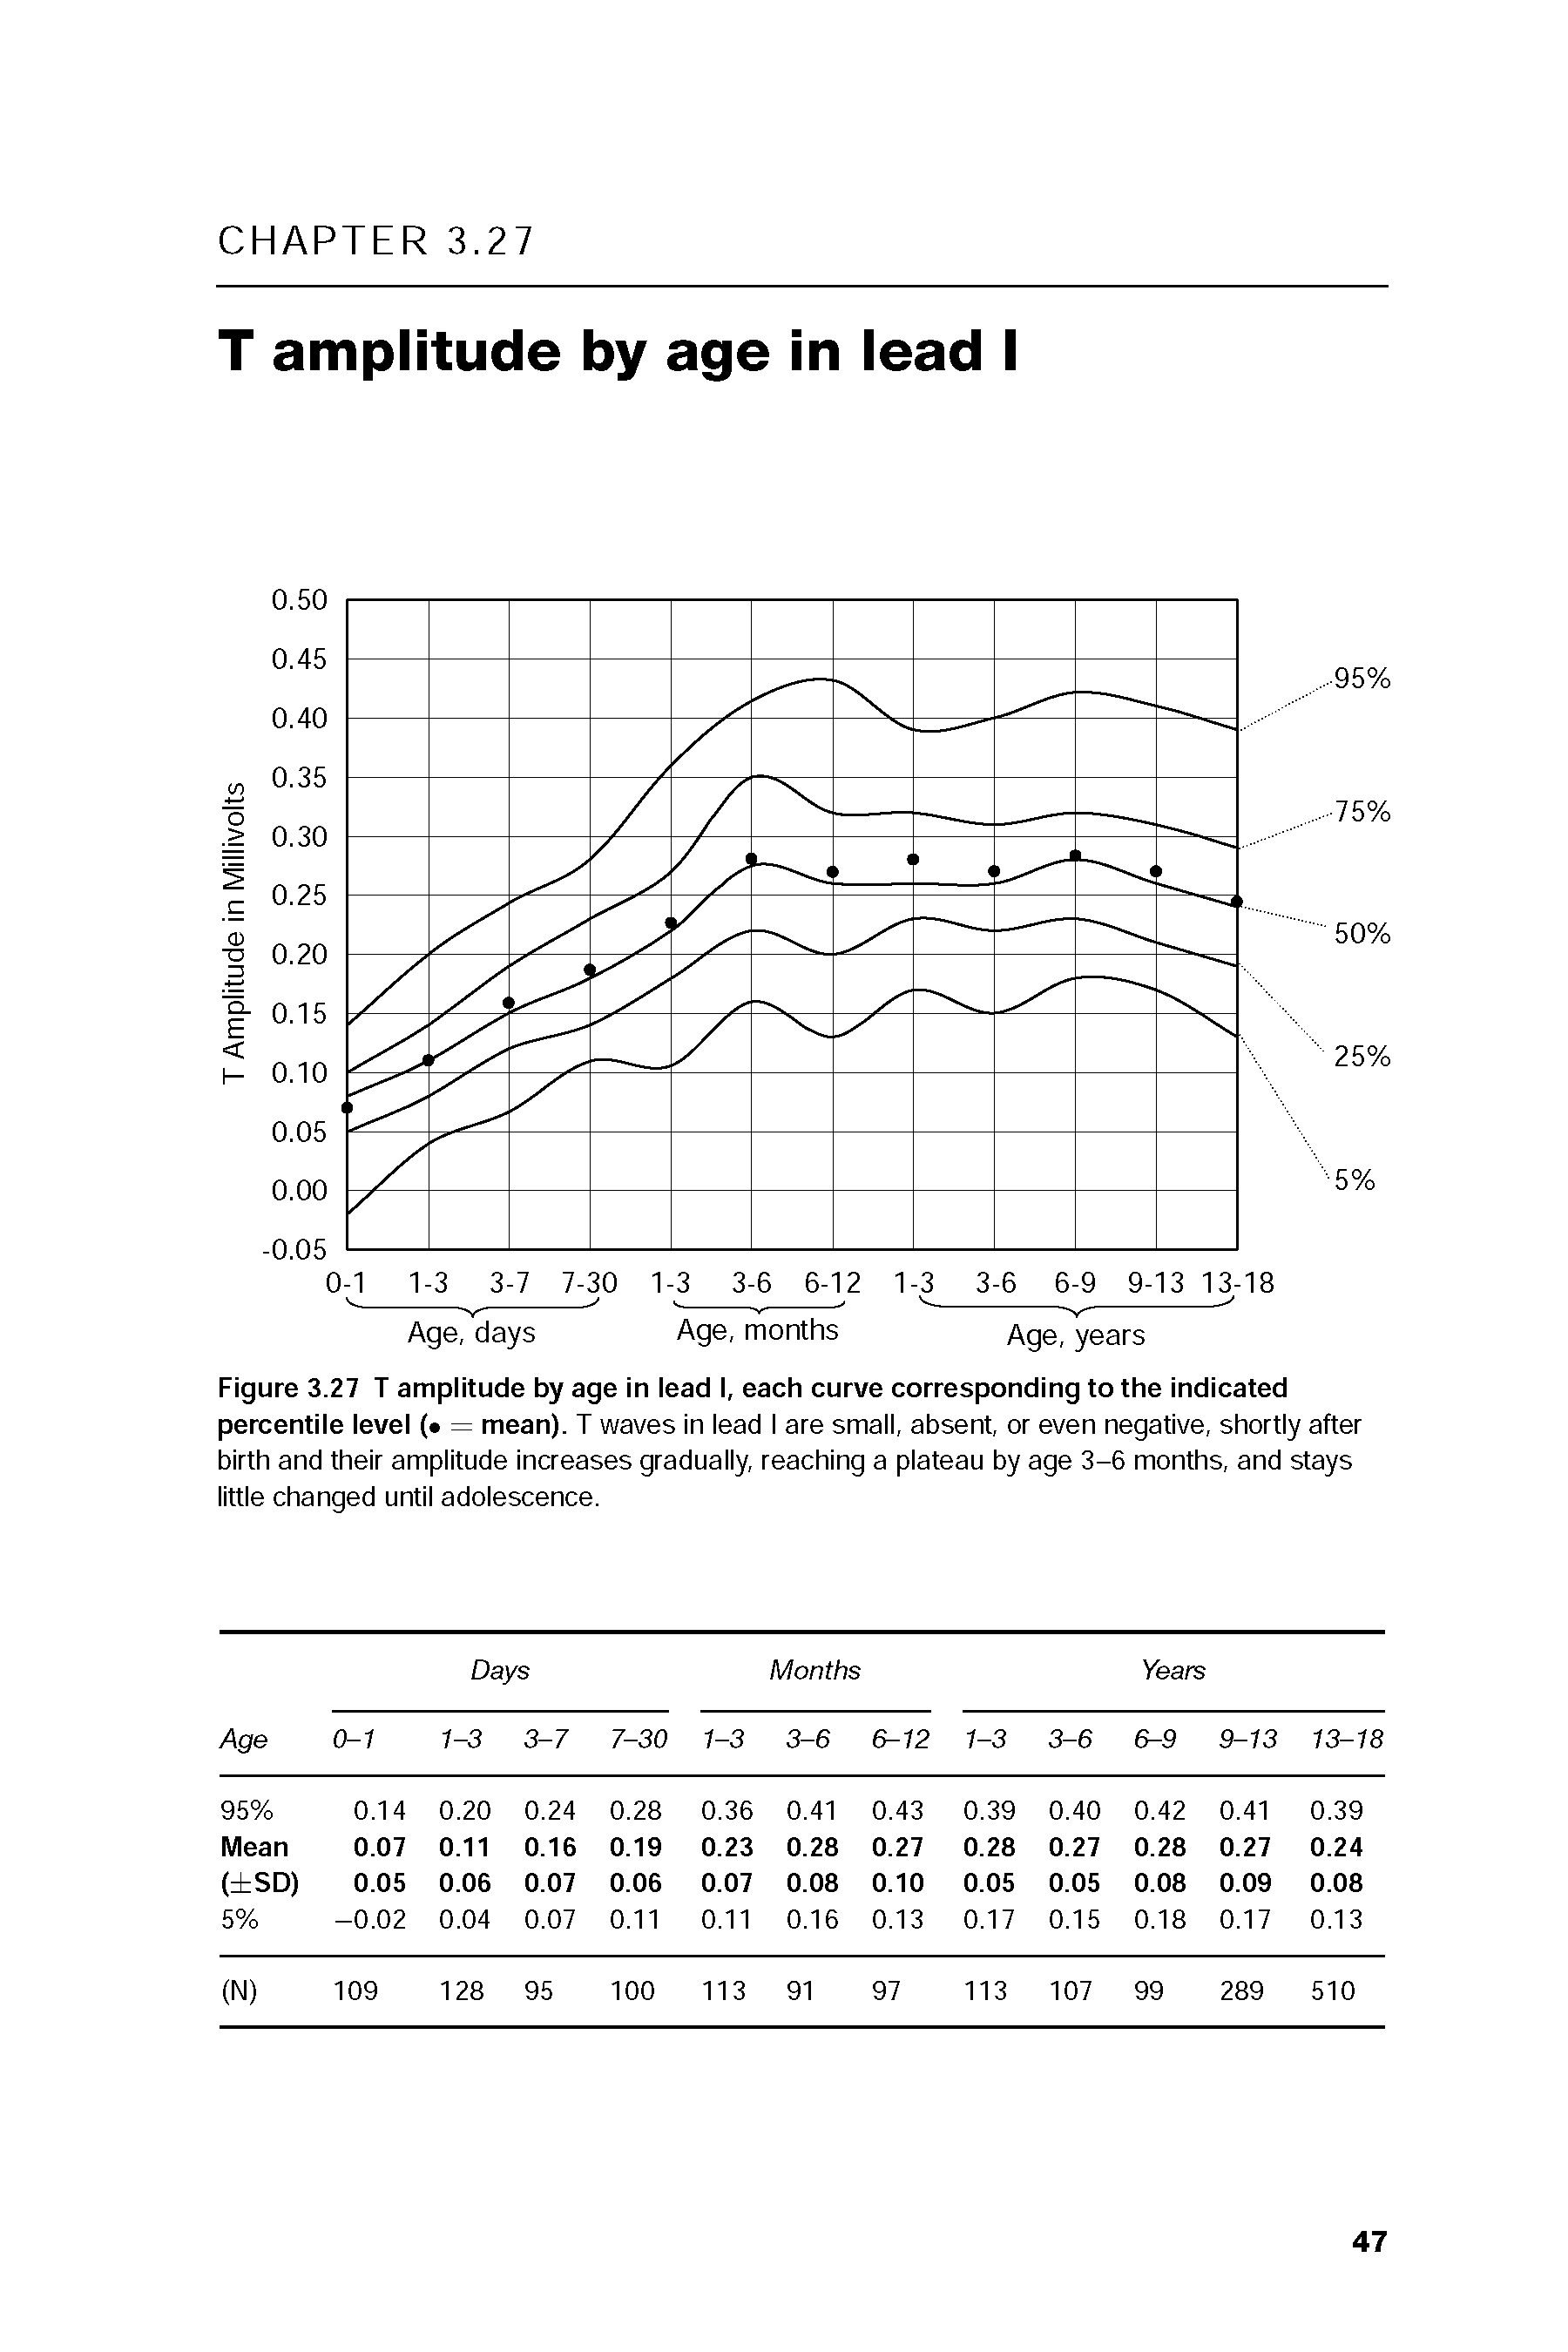 Figure 3.27 T amplitude by age in lead I, each curve corresponding to the indicated percentile level ( = mean). T waves in lead I are small, absent, or even negative, shortly after birth and their amplitude Increases gradually, reaching a plateau by age 3-6 months, and stays little changed until adolescence.